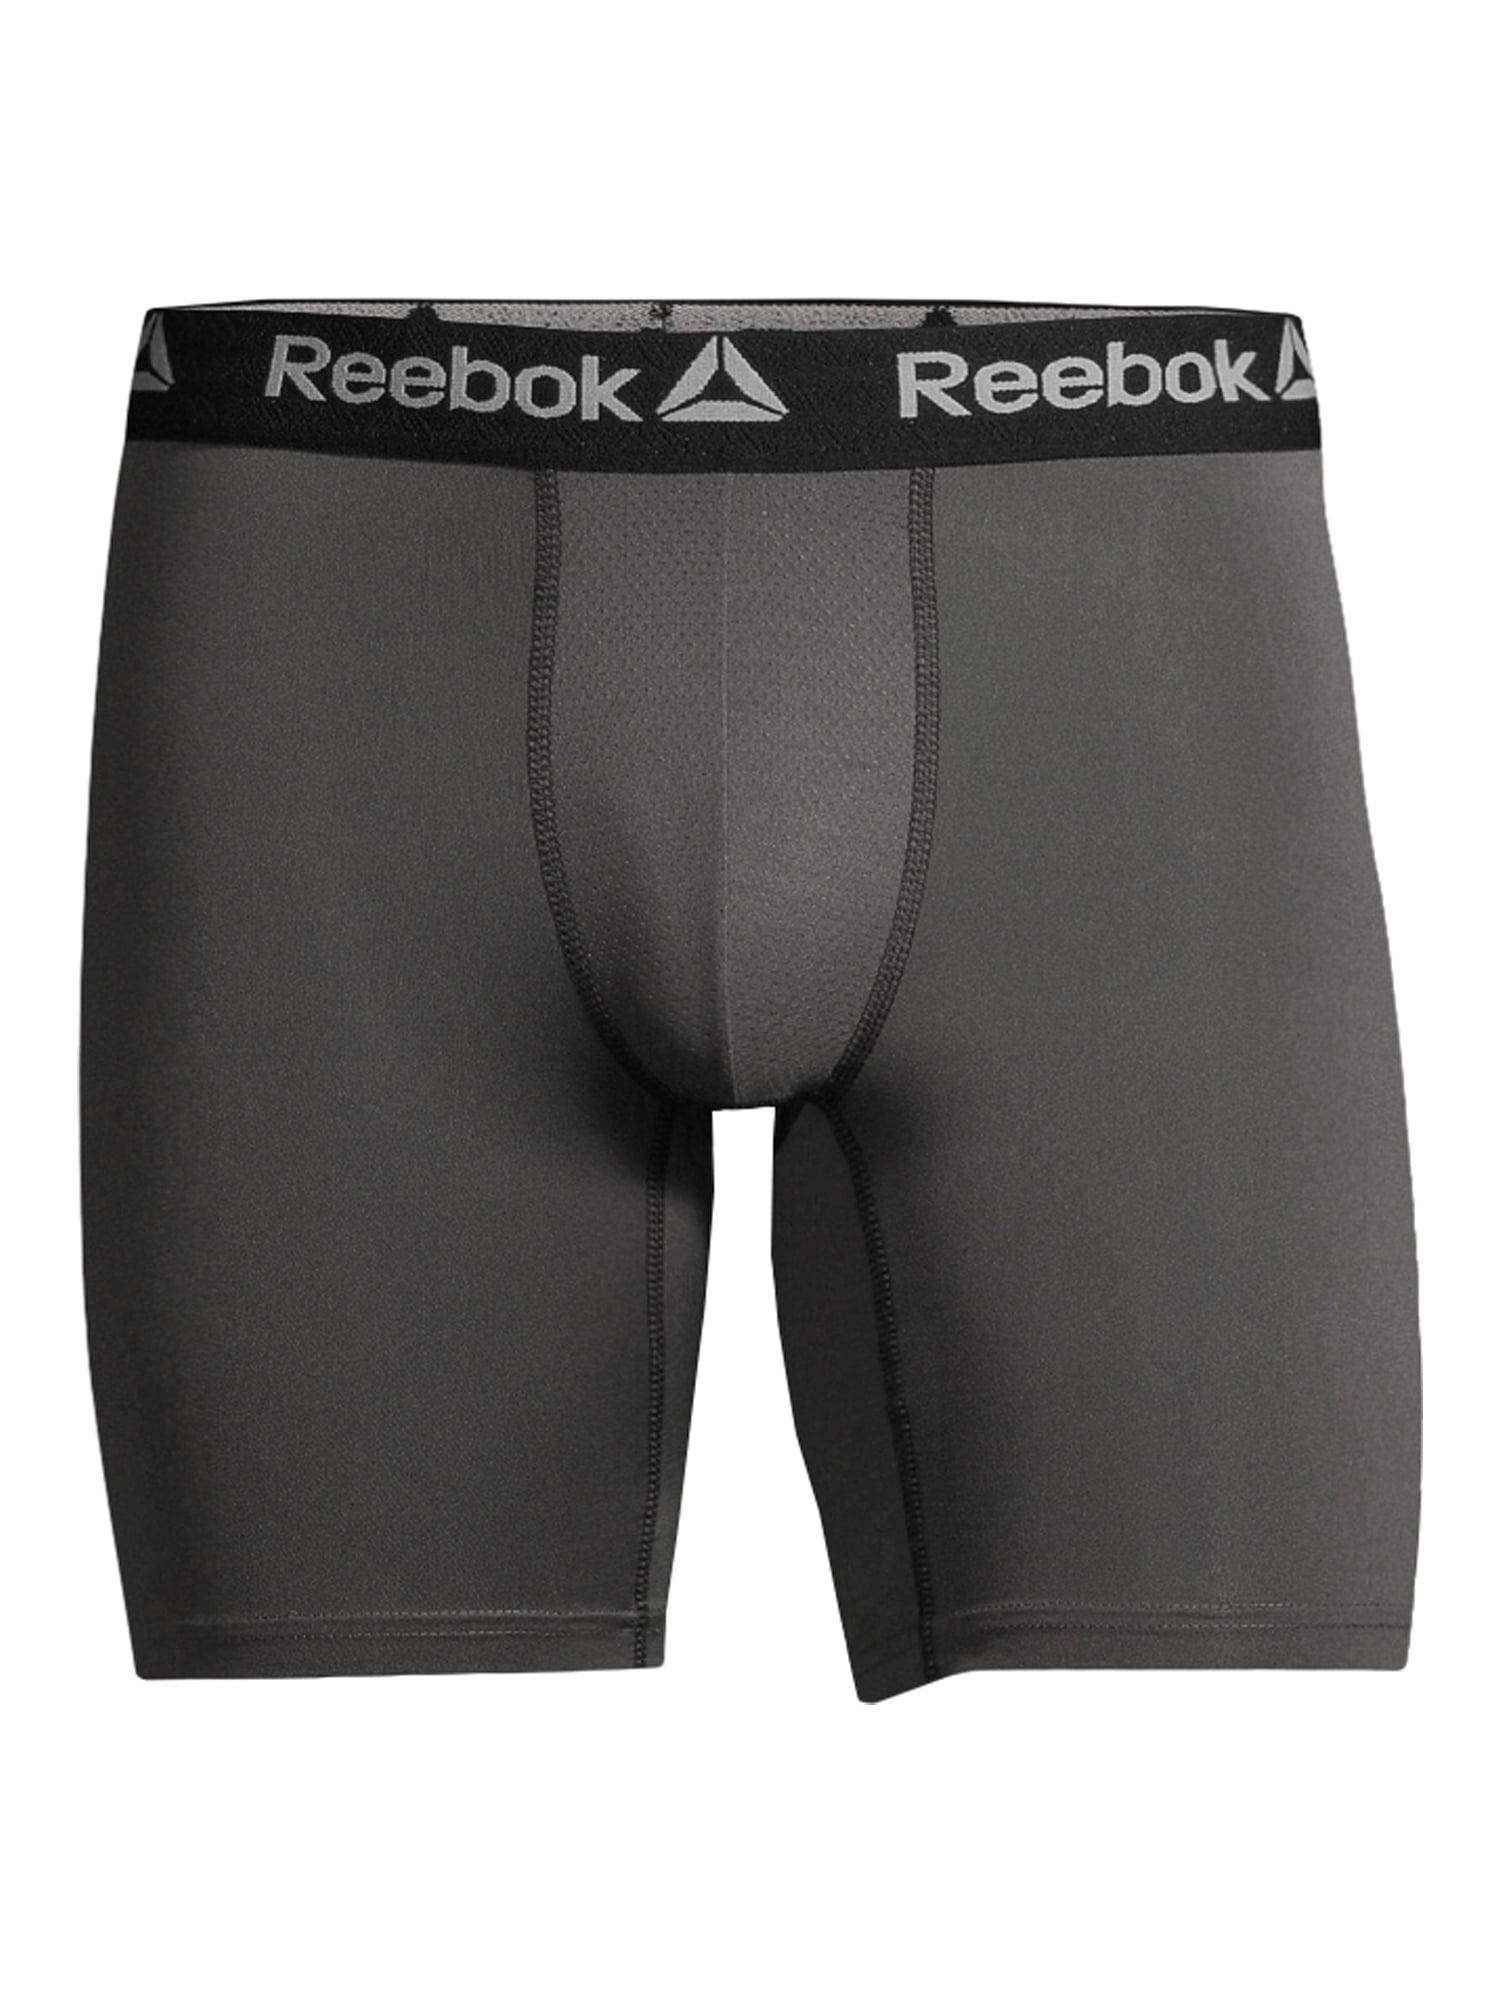 Reebok Mens 4 Pack Performance Boxer Briefs with Comfort Pouch 